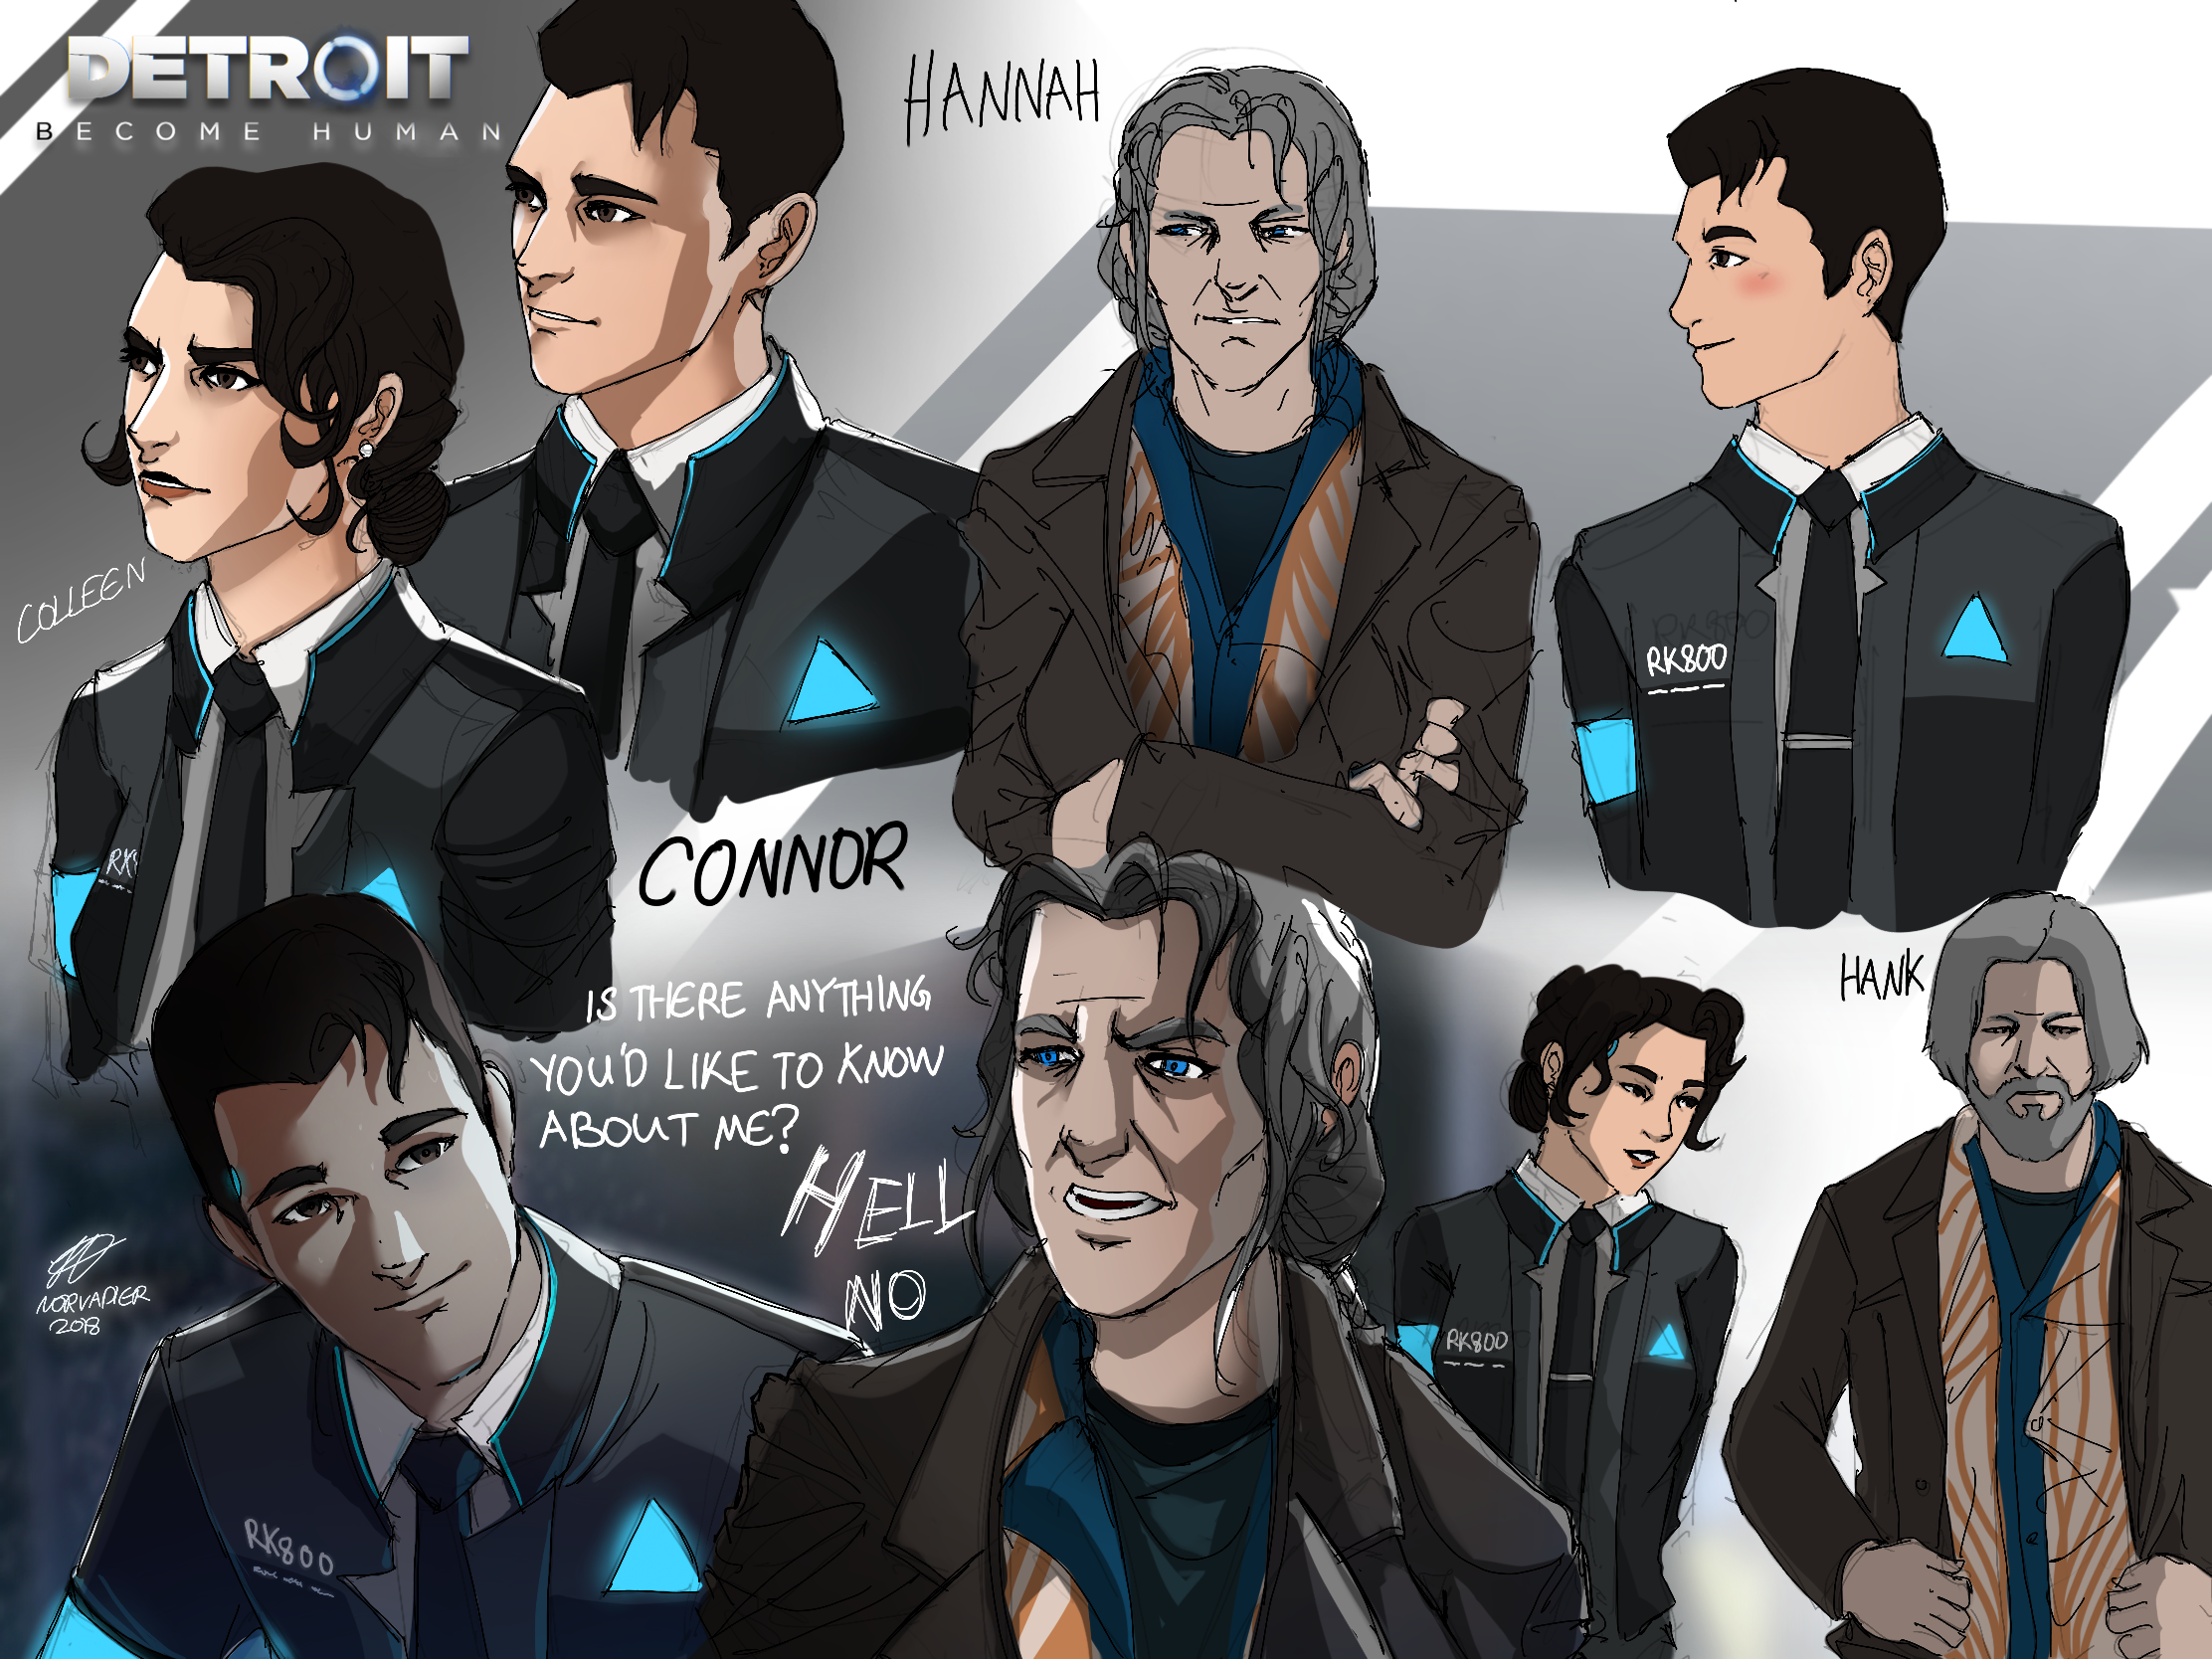 The genderswap noone asked for : r/DetroitBecomeHuman